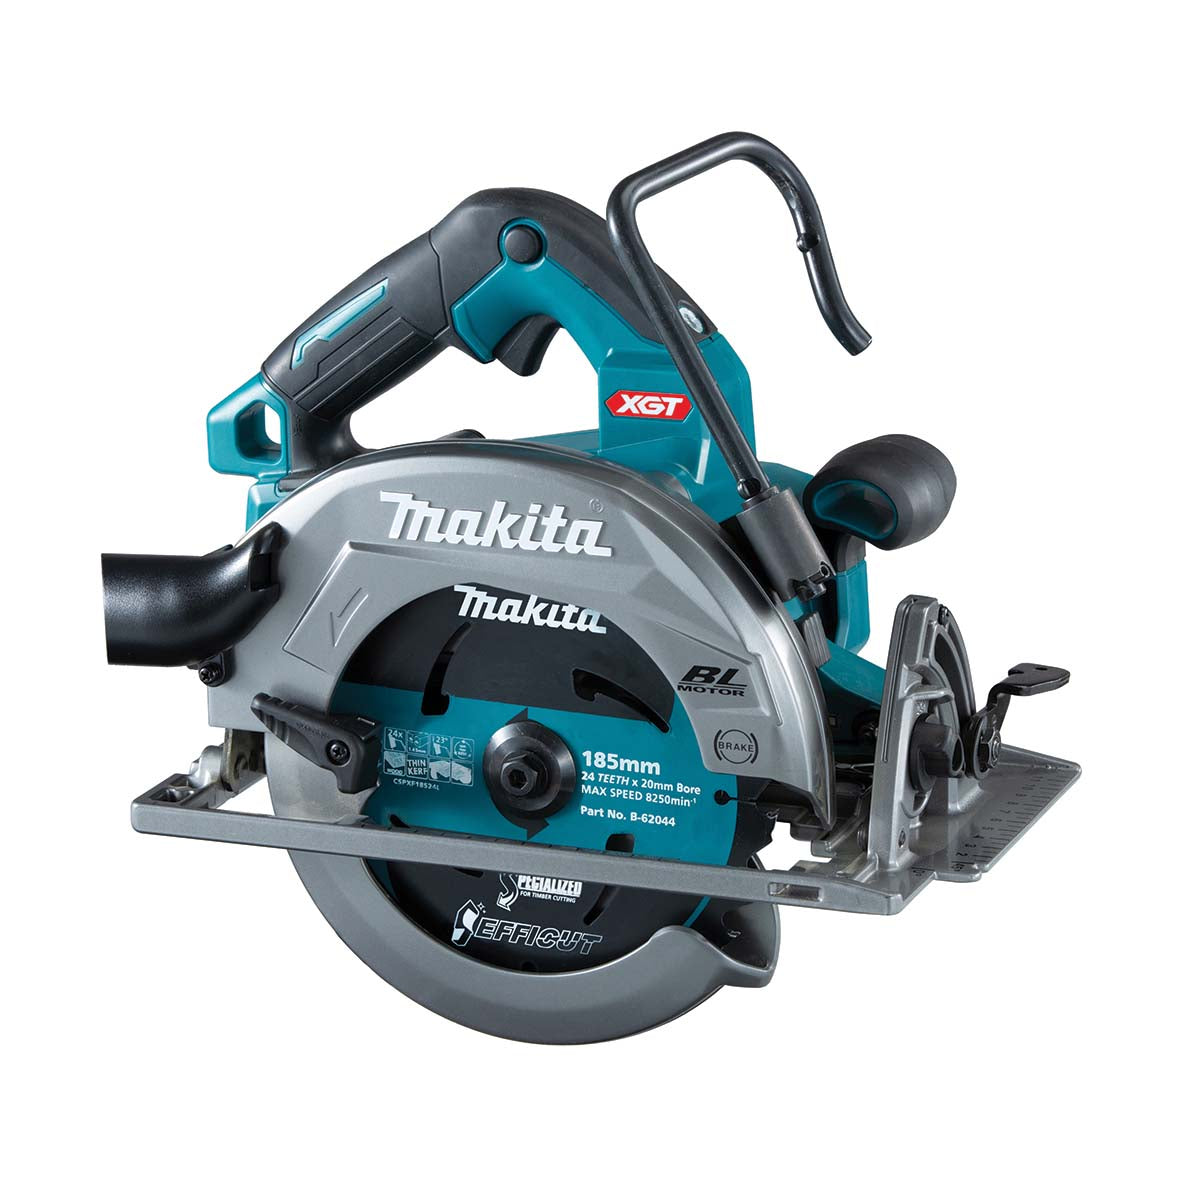 40V 185mm (7-1/4") Brushless AWS* Circular Saw Bare (Tool Only) HS003GZ by Makita